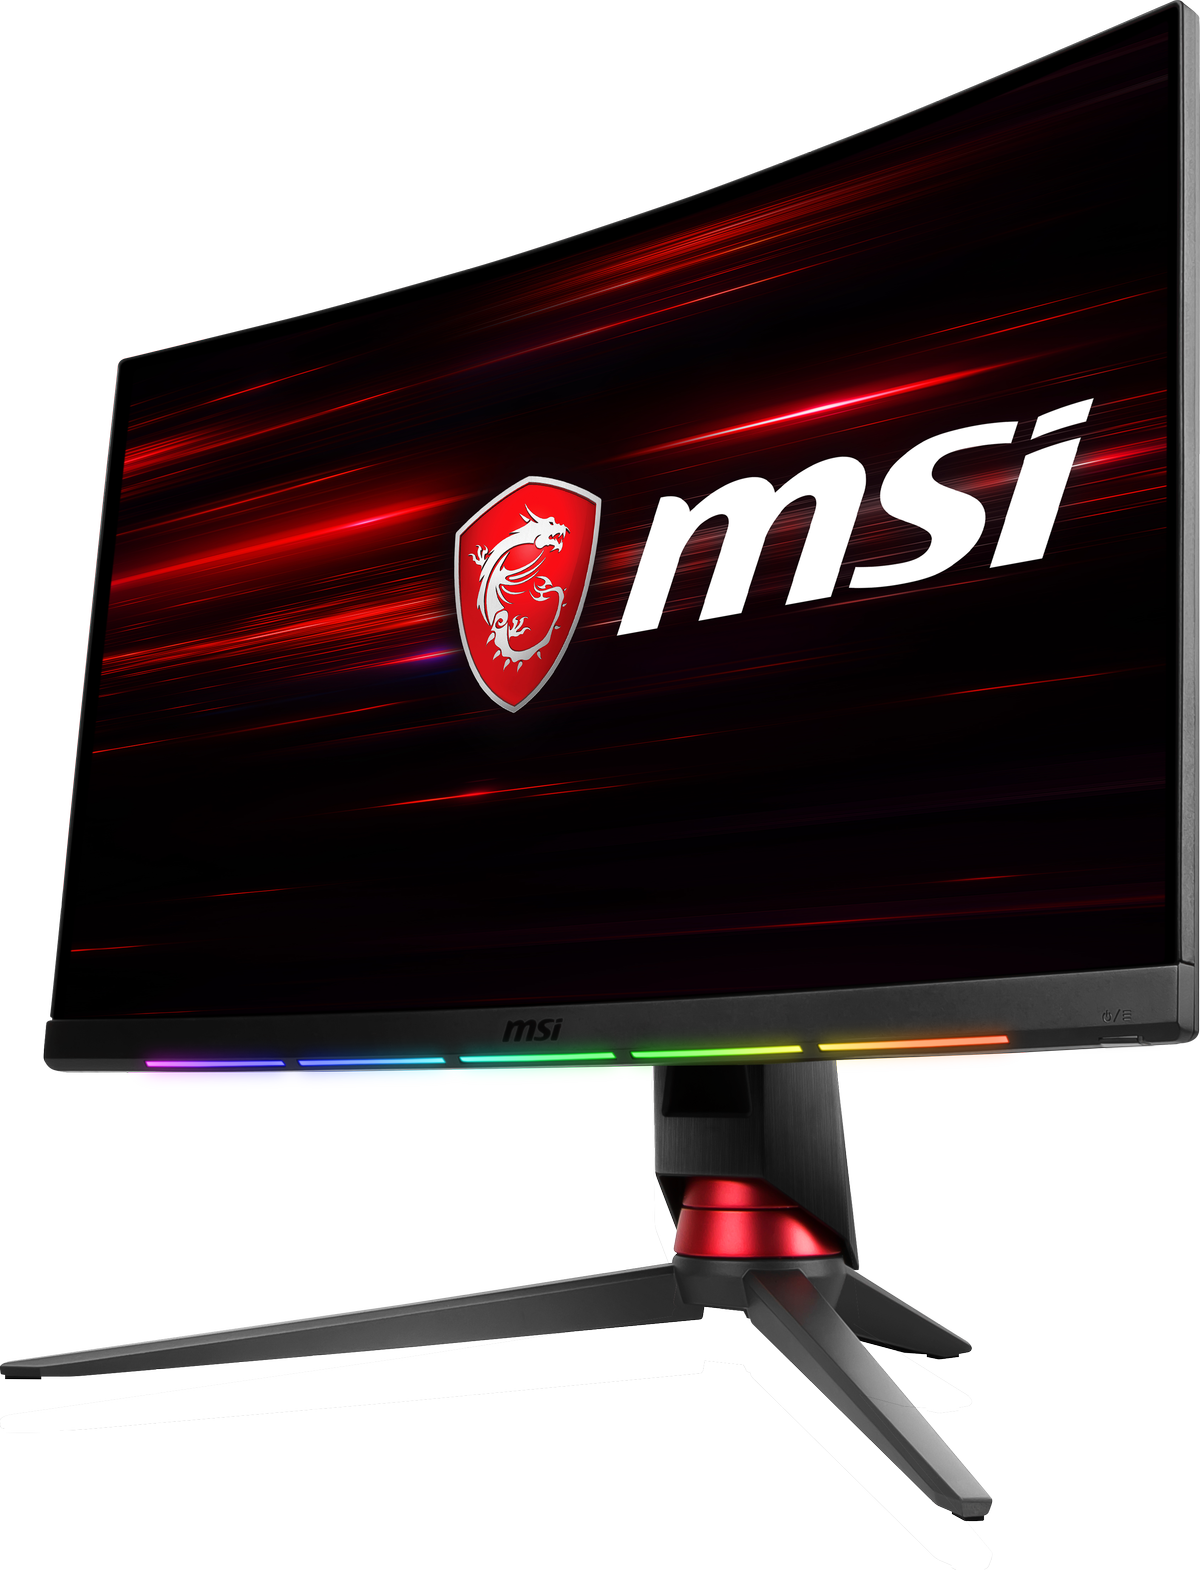 MSI at CES 2018: New Optix MPG series Monitors - 27” Curved VA Panels Up to  144 Hz Refresh and RGB LED